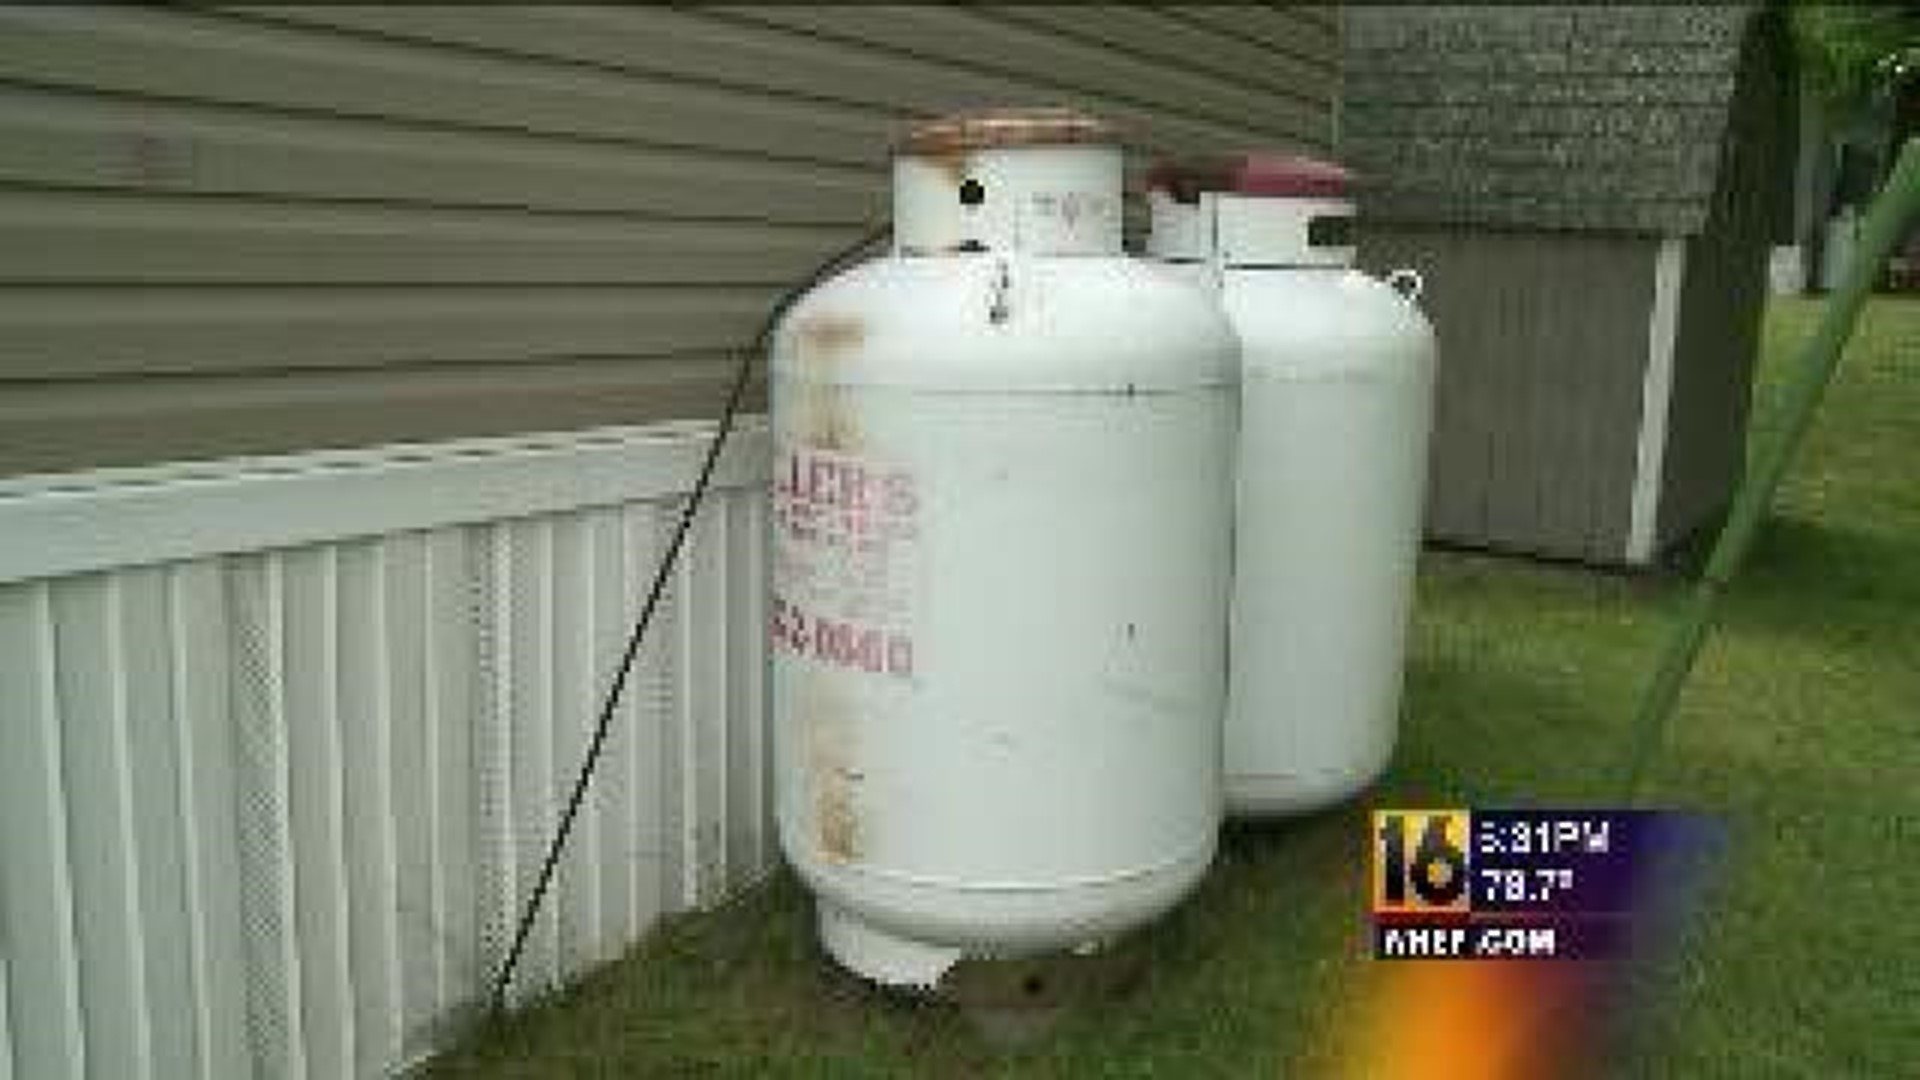 Residents Forced To Change Way To Heat Homes